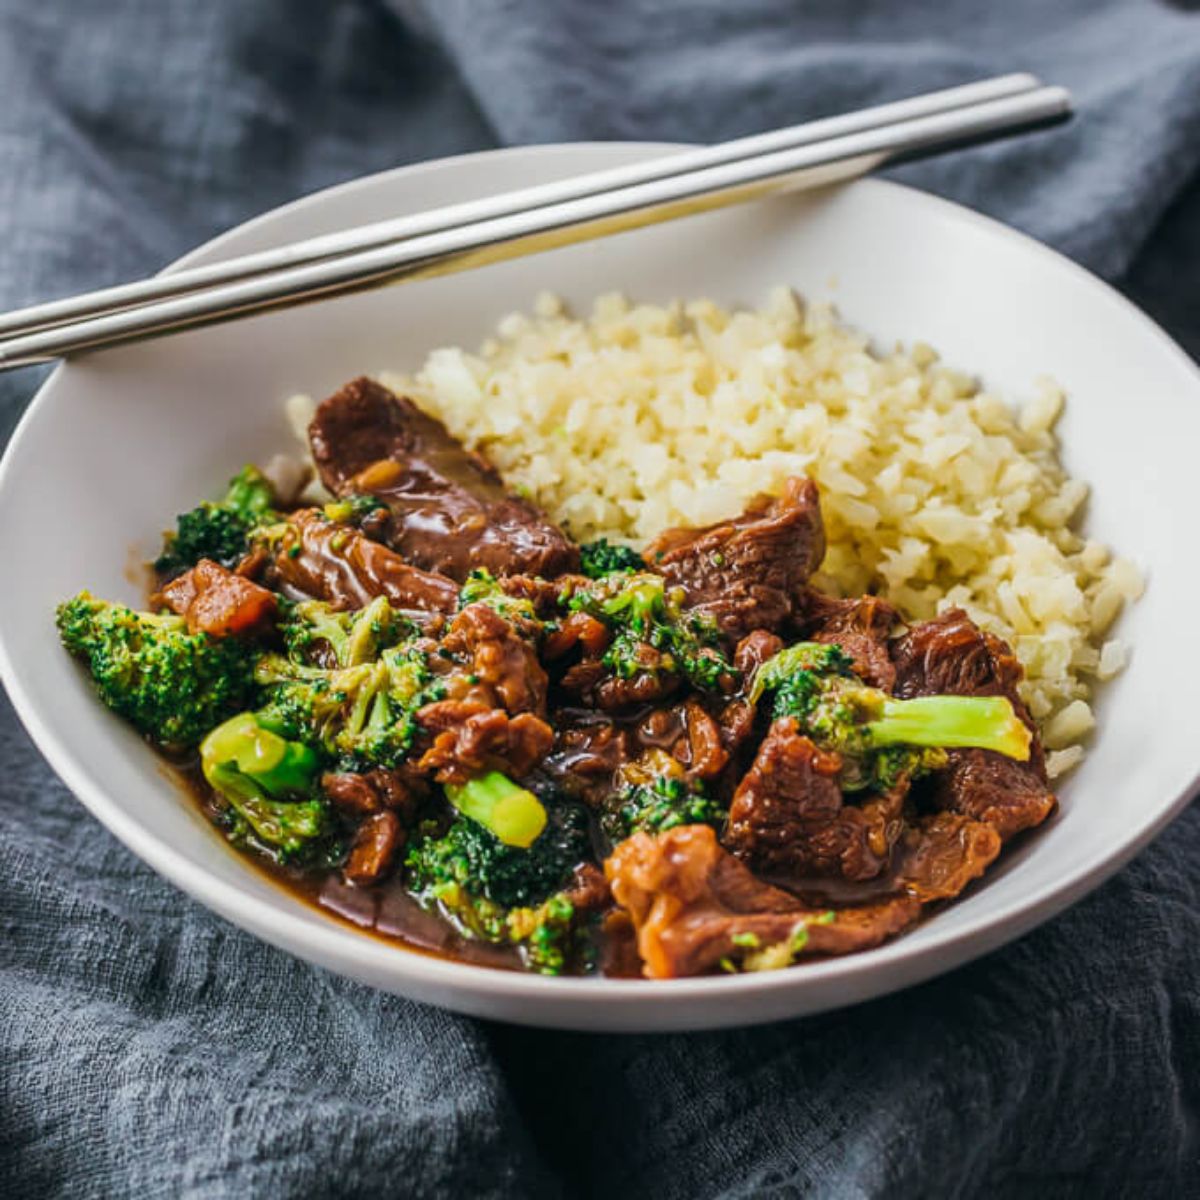 A gray linen cloth lays across the shot. On top is a round white bowl. Inside is a beef and broccoli sauce with cauliflower rice behind it. Silver chopsticks lay across the bowl